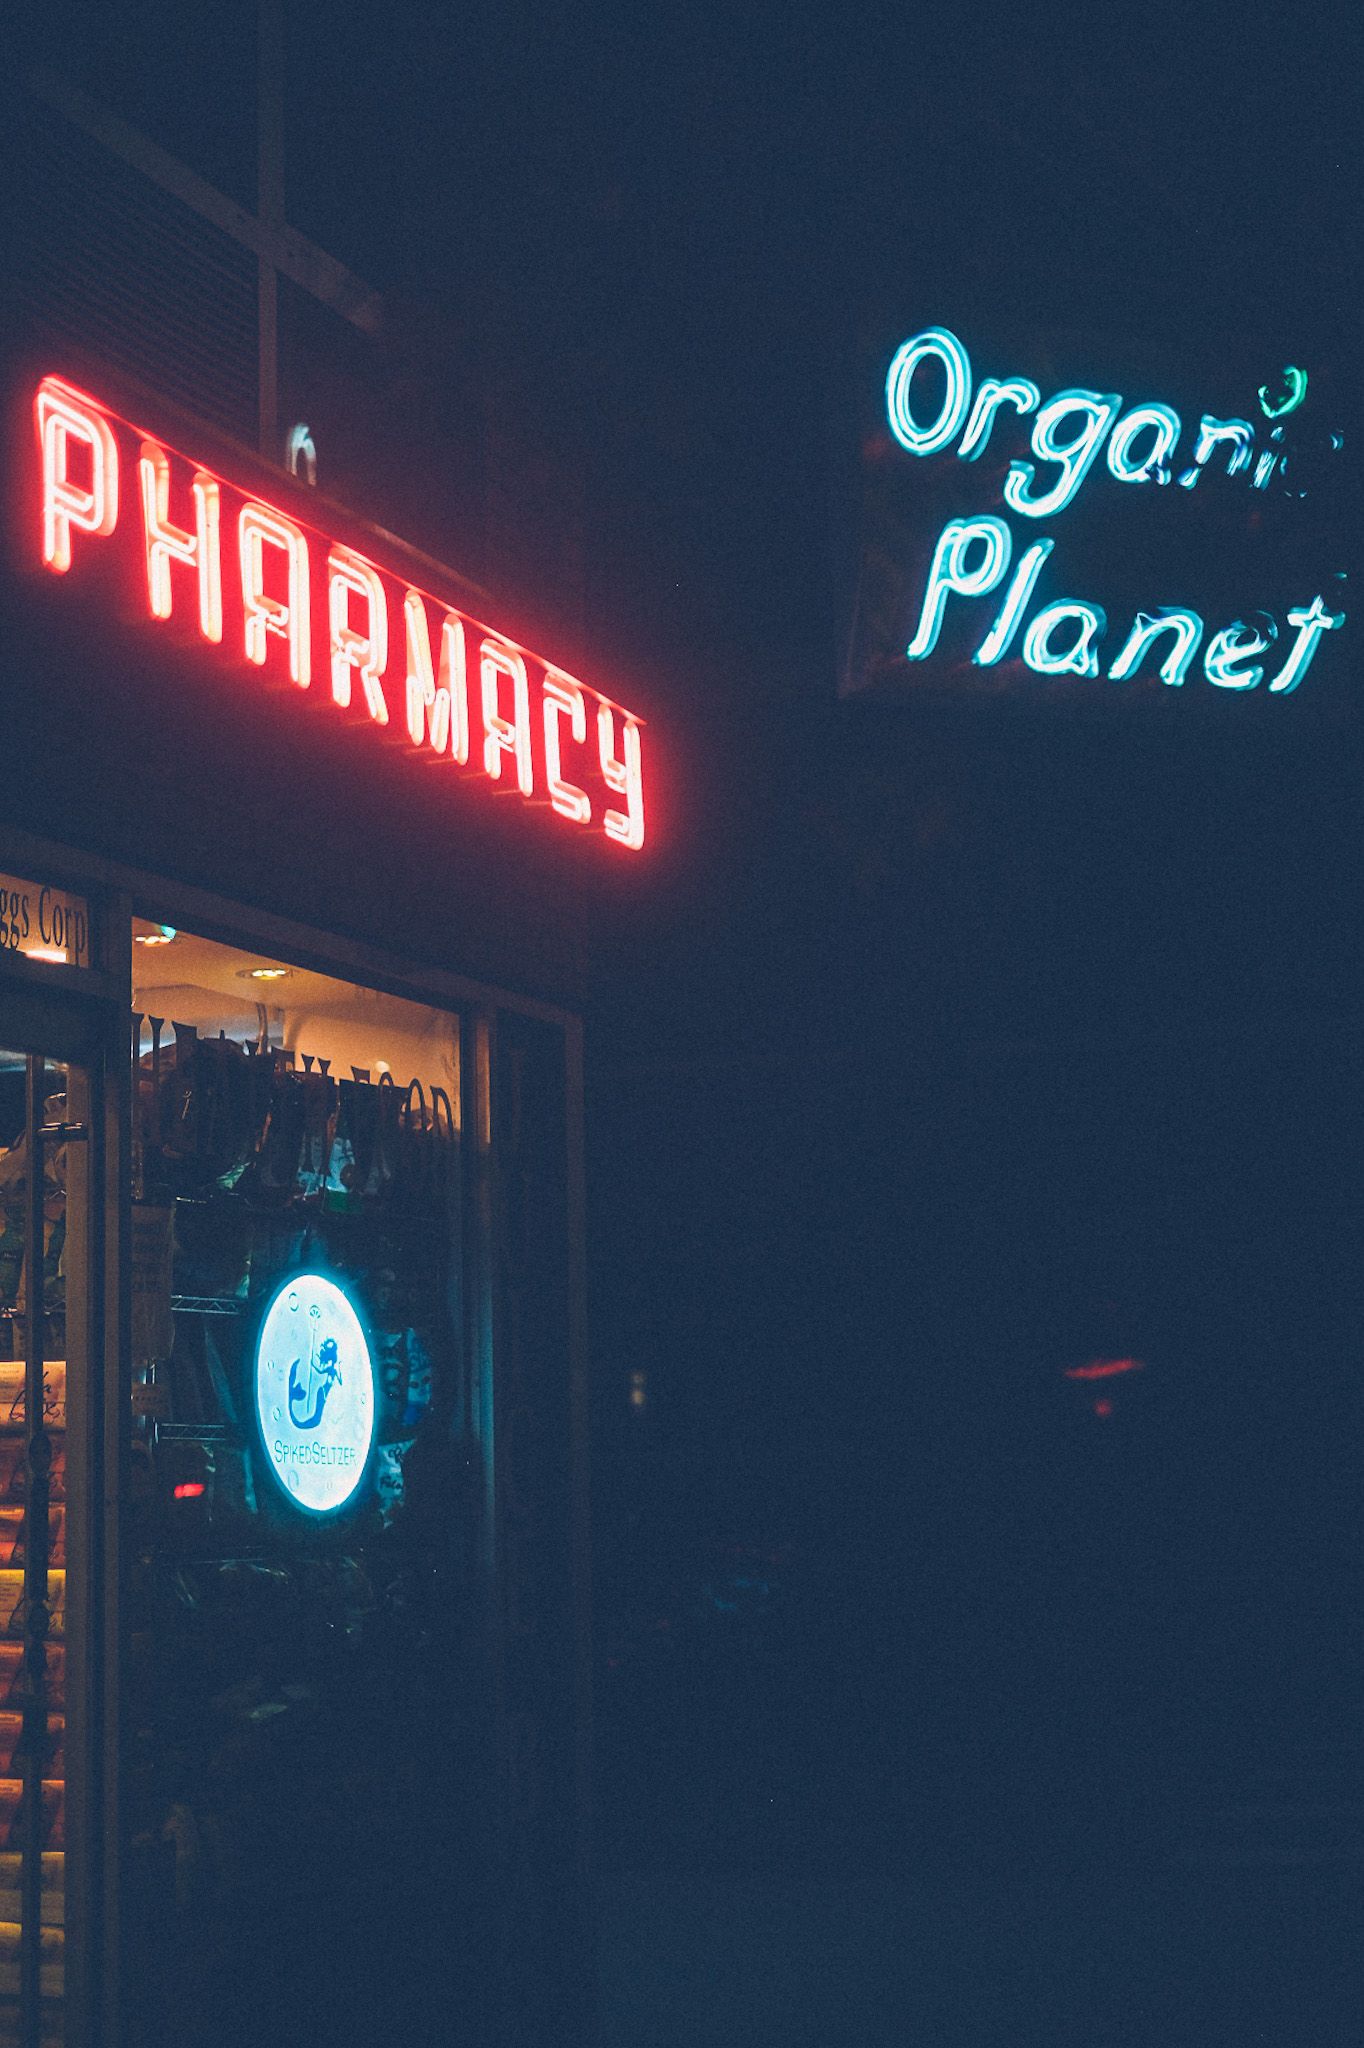 Two neon signs glow from the darkness. One says organic planet, in blue, while the other days Pharmacy in red over a doorway in the dark.